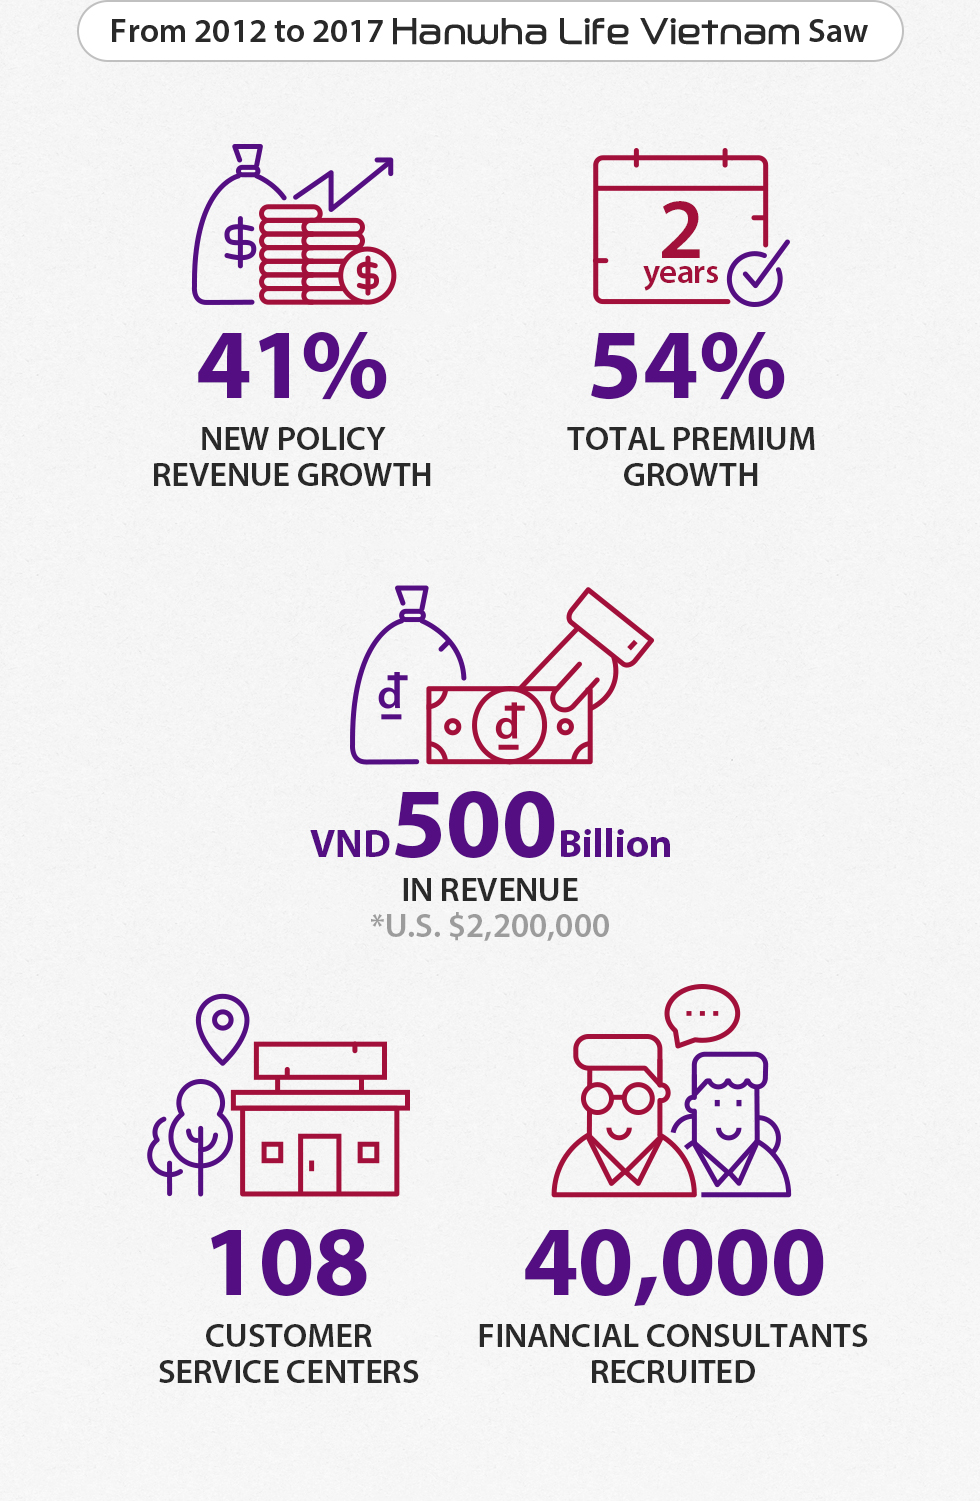 From 2012 to 2017 Hanwha Life Vietnam Saw : : 1)41%:NEW POLICY REVENUE GROWTH, 2)54%:TOTAL PREMIUM GROWTH, 3)108:CUSTOMER SERVICE CENTERS, 4)VND500Billion:IN REVENUE *U.S. $2,200,000, 5)40,000:FINANCIAL CONSULTANTS RECRUITED